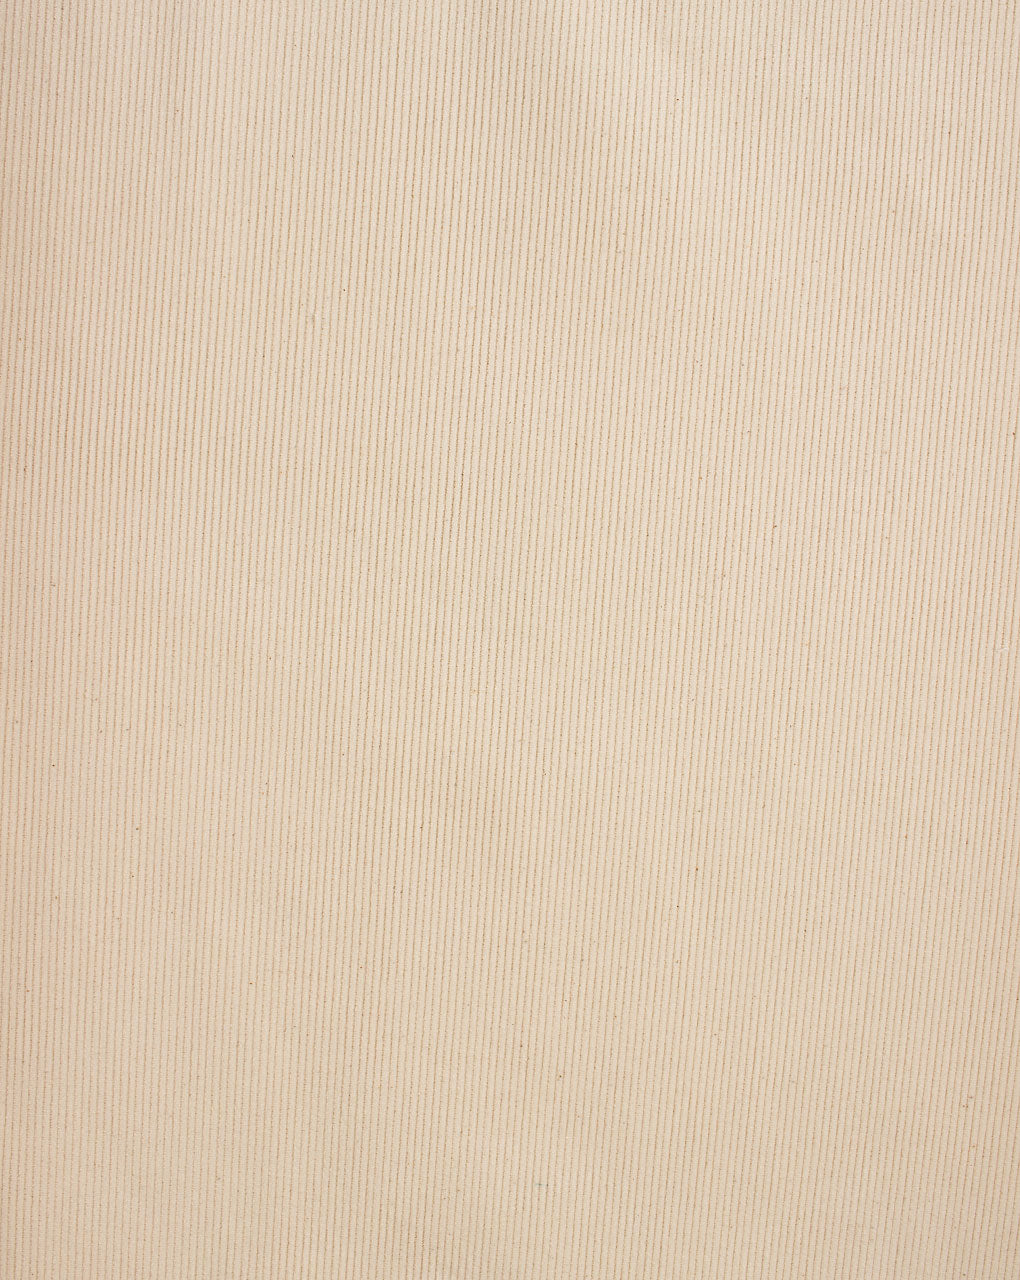 Greige Suiting Cotton Lycra Fabric (Bombay Lycra)